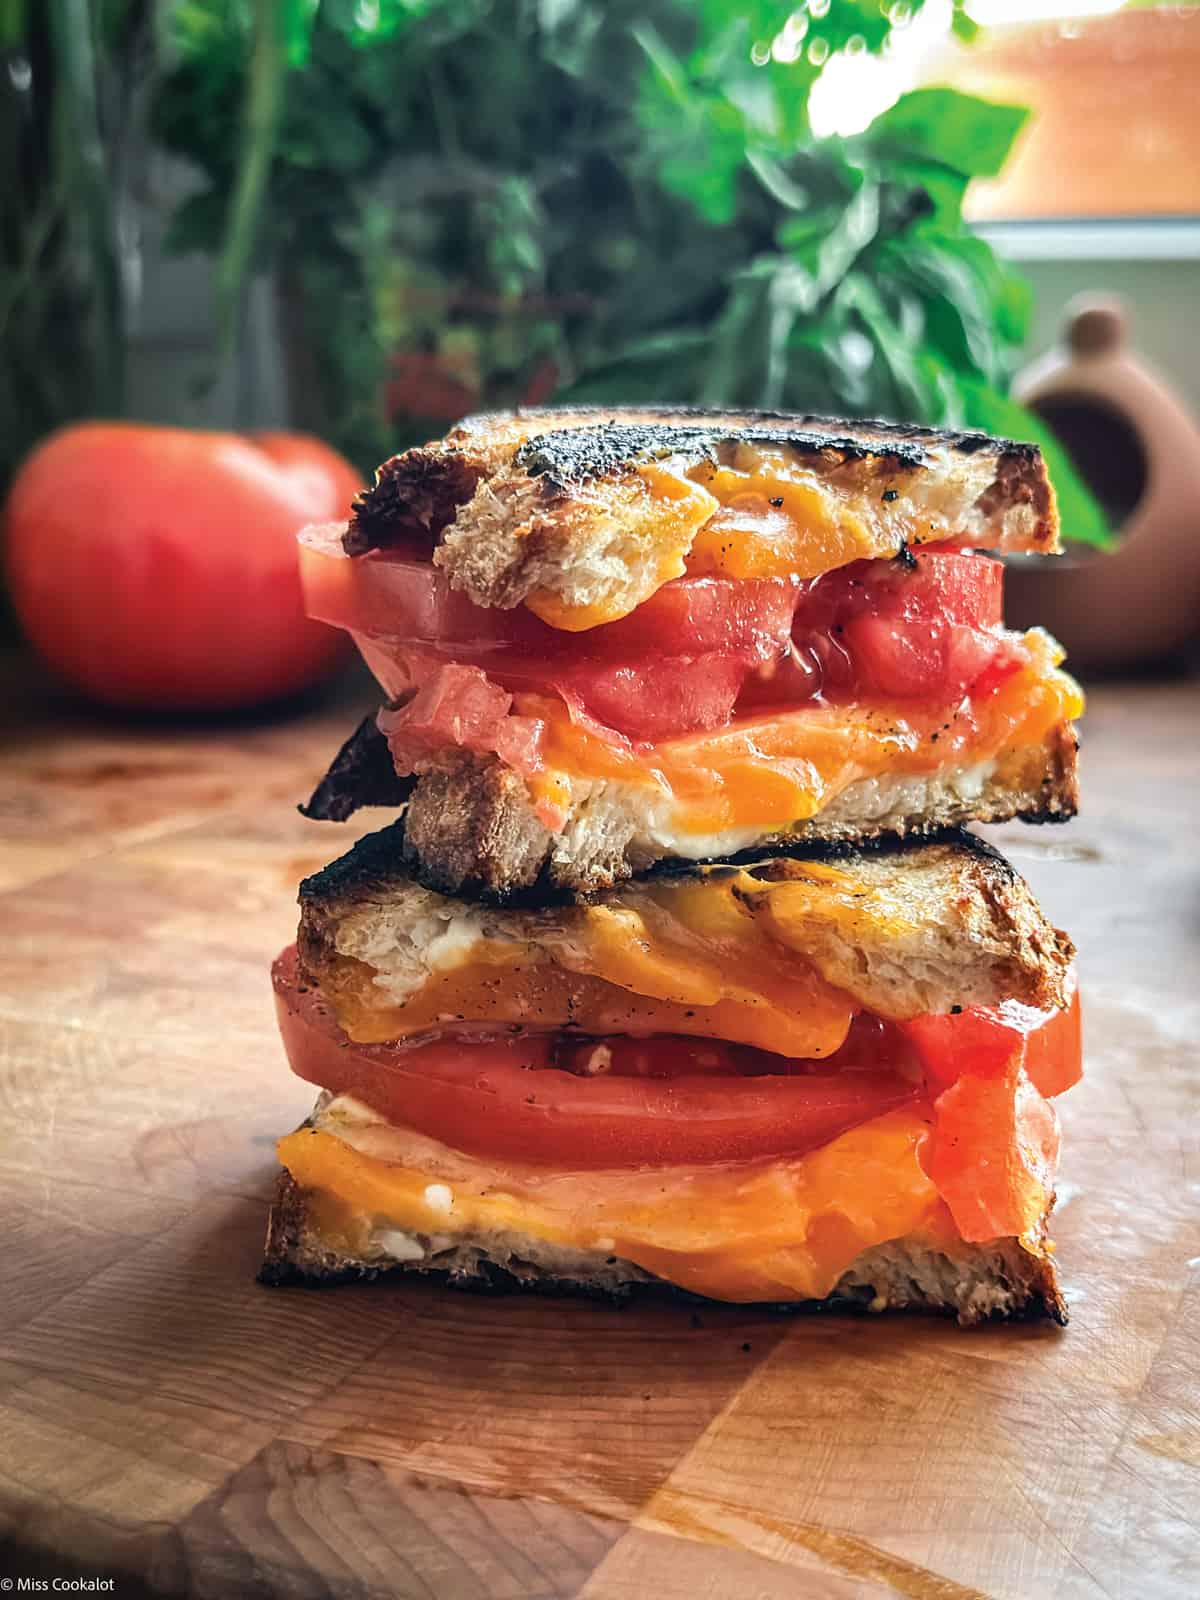 Two pieces of tomato mayo sandwich with melty cheddar cheese, stacked on a wooden table, at the back green herbs in vases.